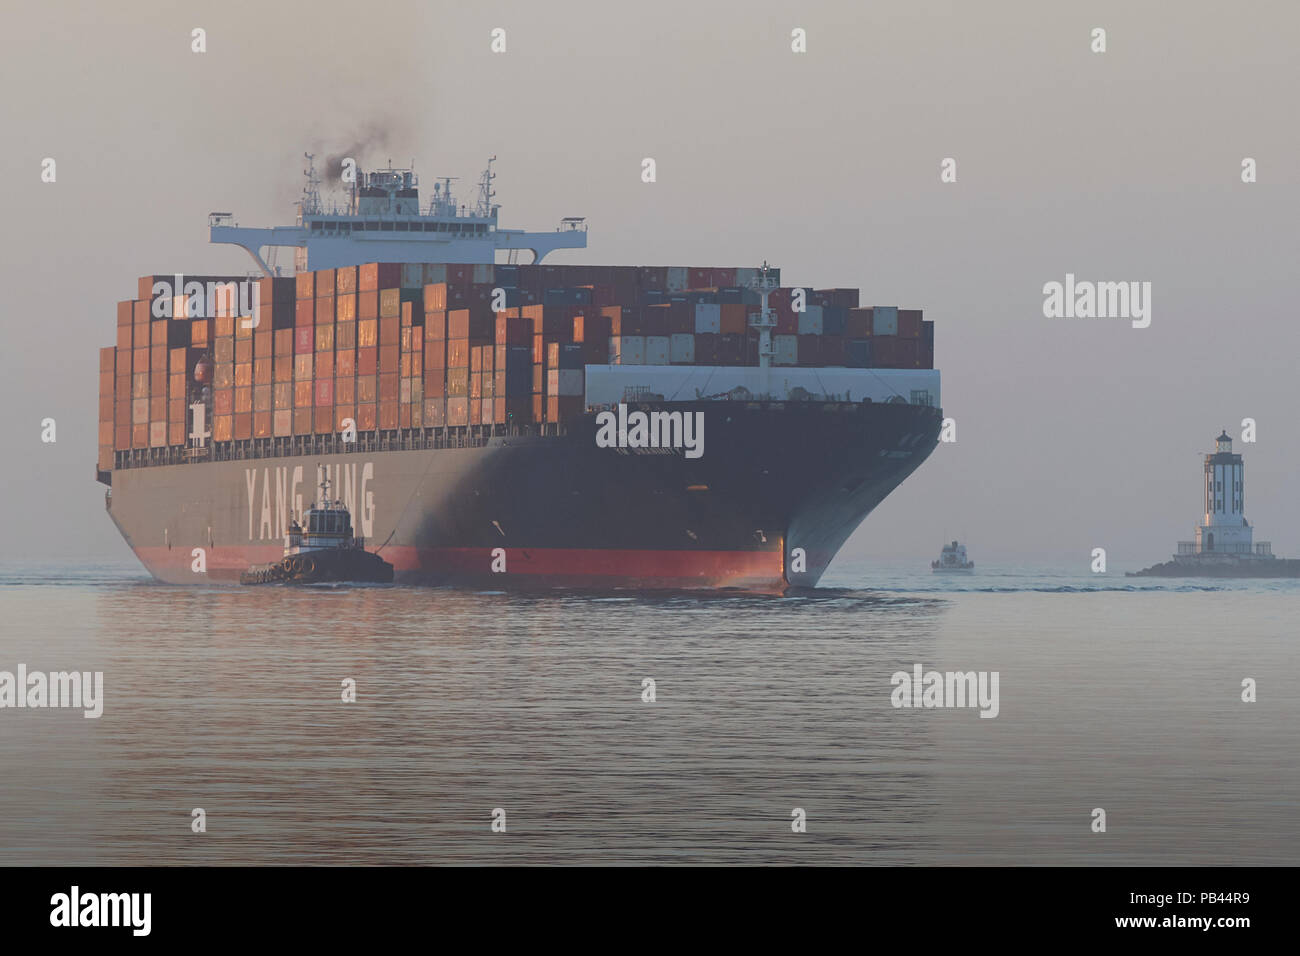 The Giant YANG MING Container Ship, YM UNANIMITY, Enters The Los Angeles Main Channel, The Angels Gate Harbor Light To The Right. California, USA. Stock Photo